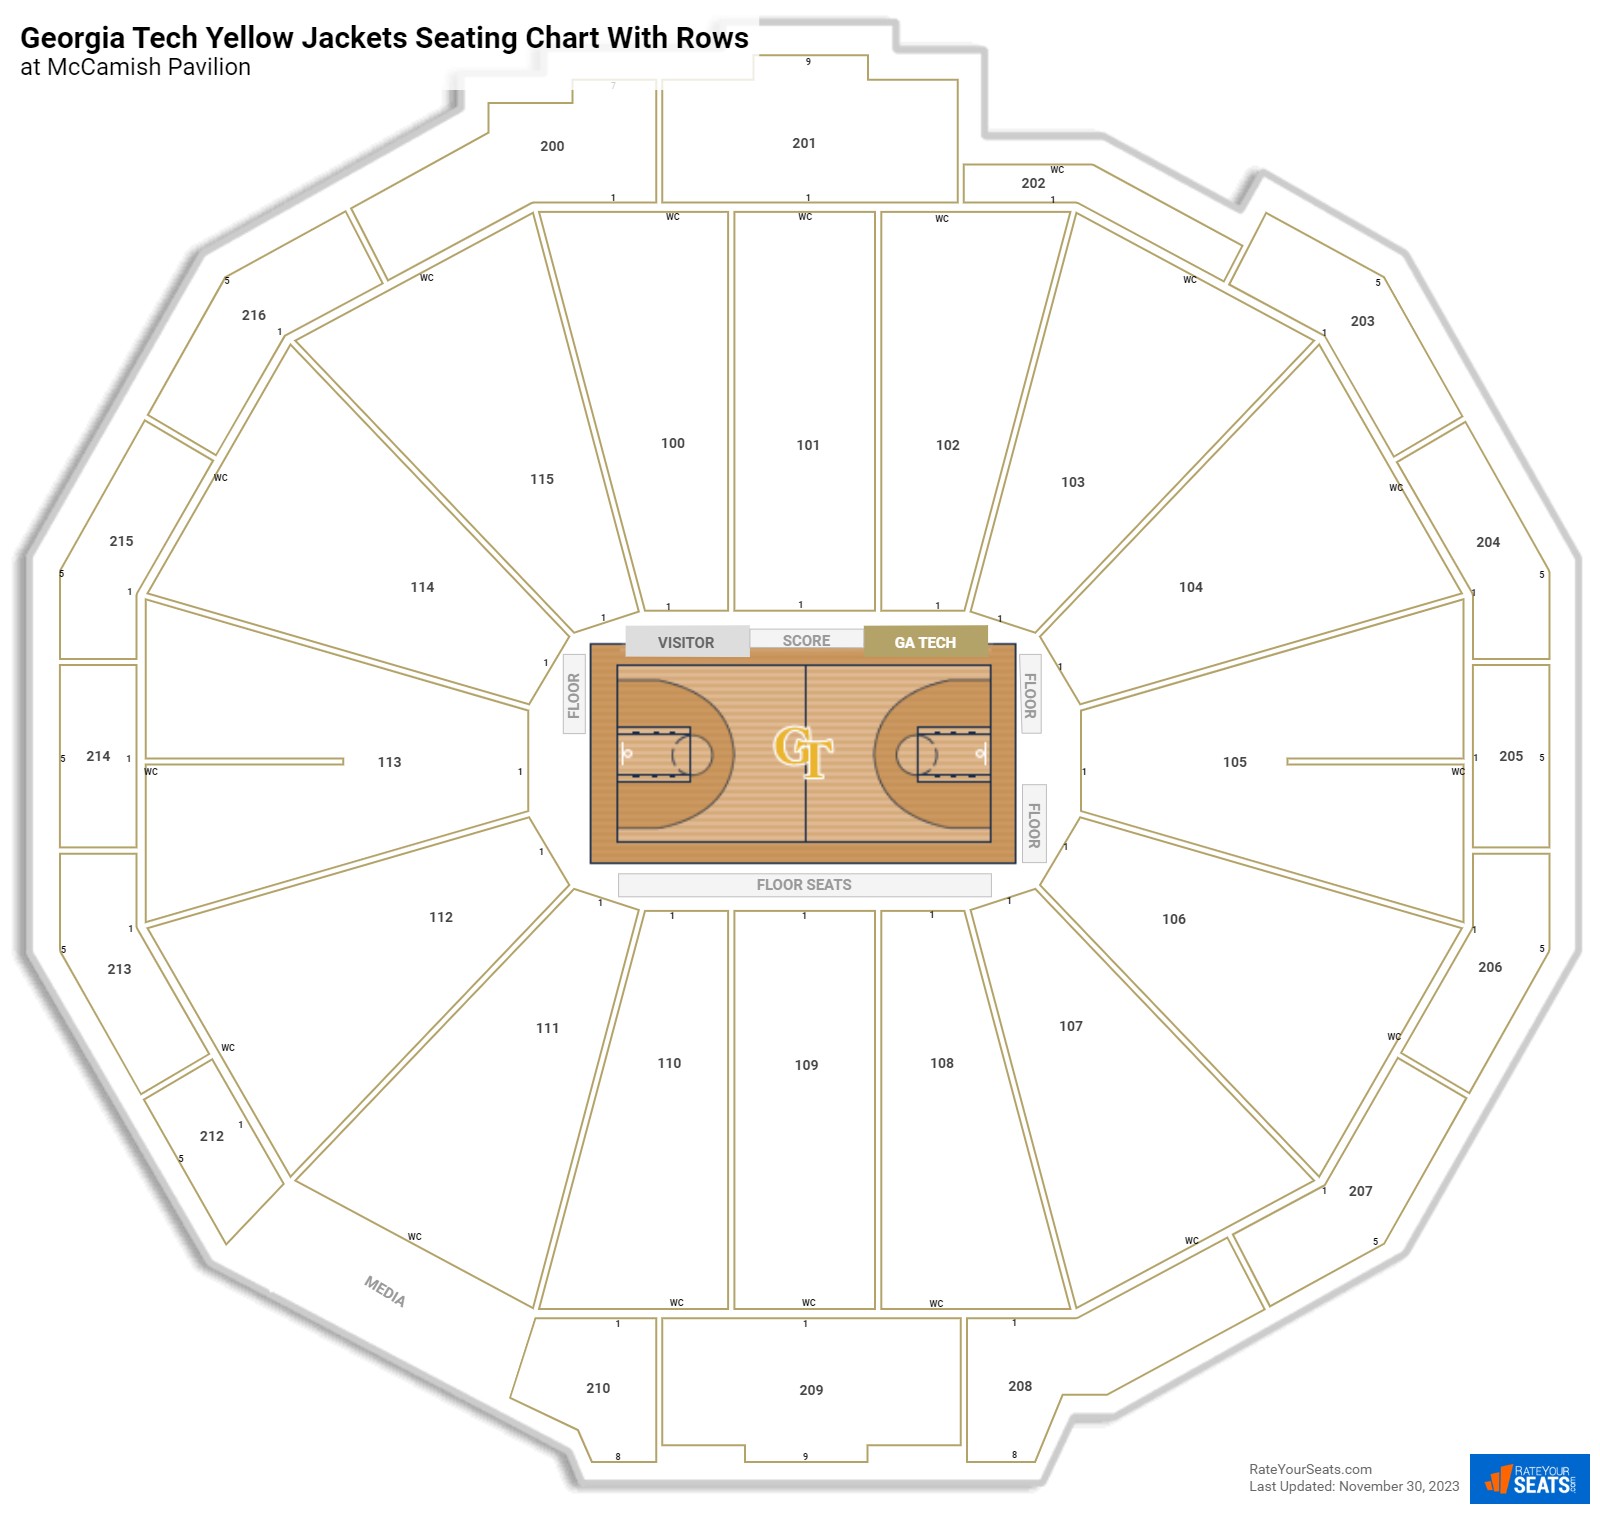 McCamish Pavilion seating chart with row numbers